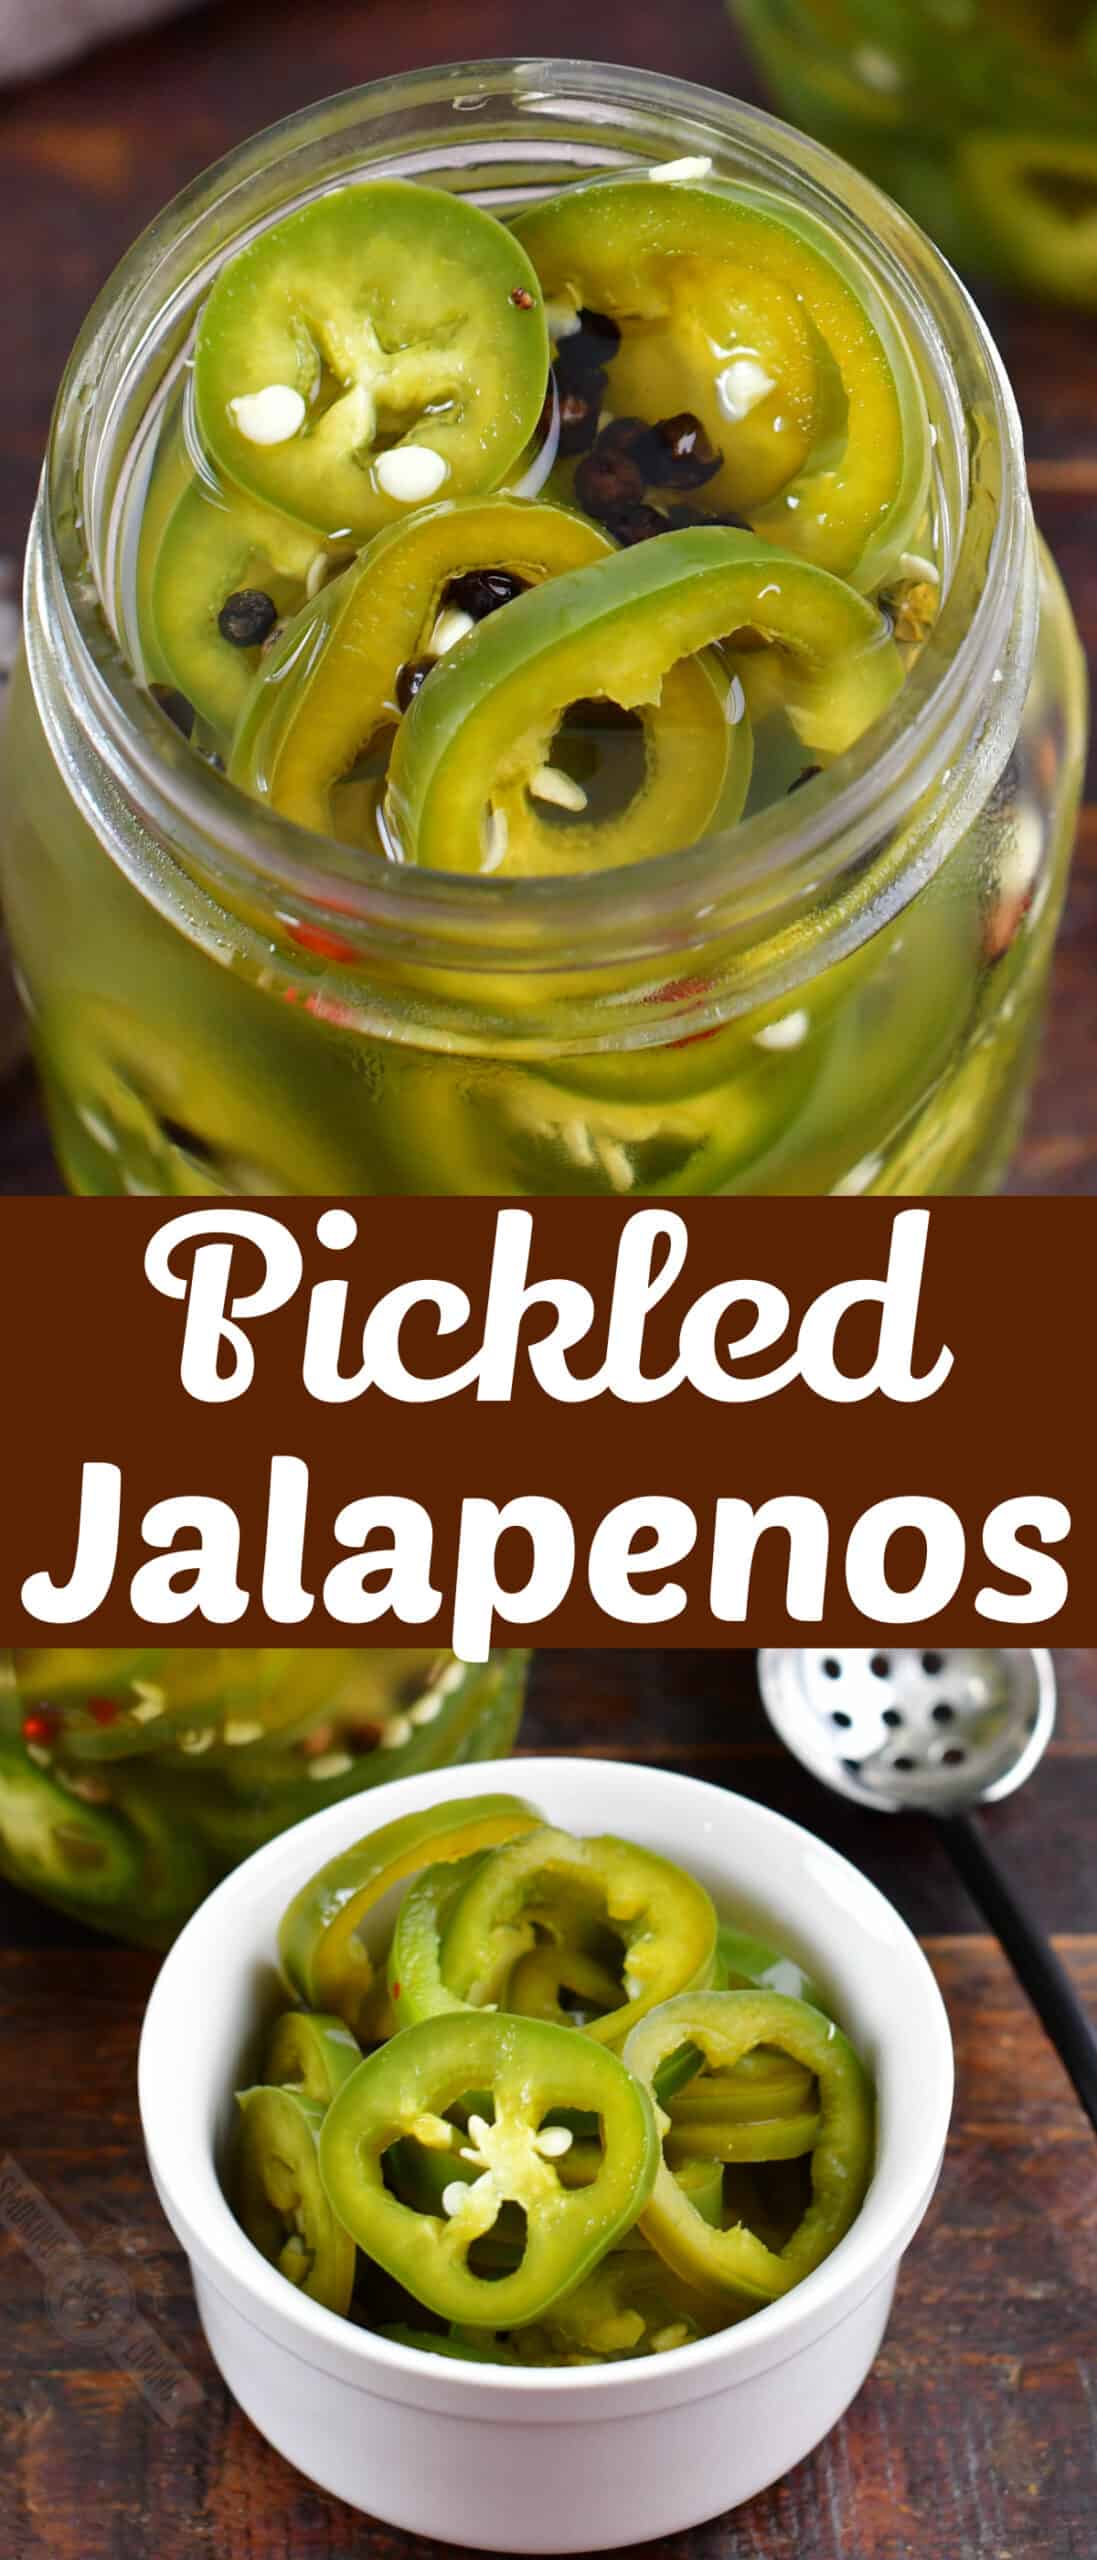 two images of pickled jalapenos in a jar and in a bowl